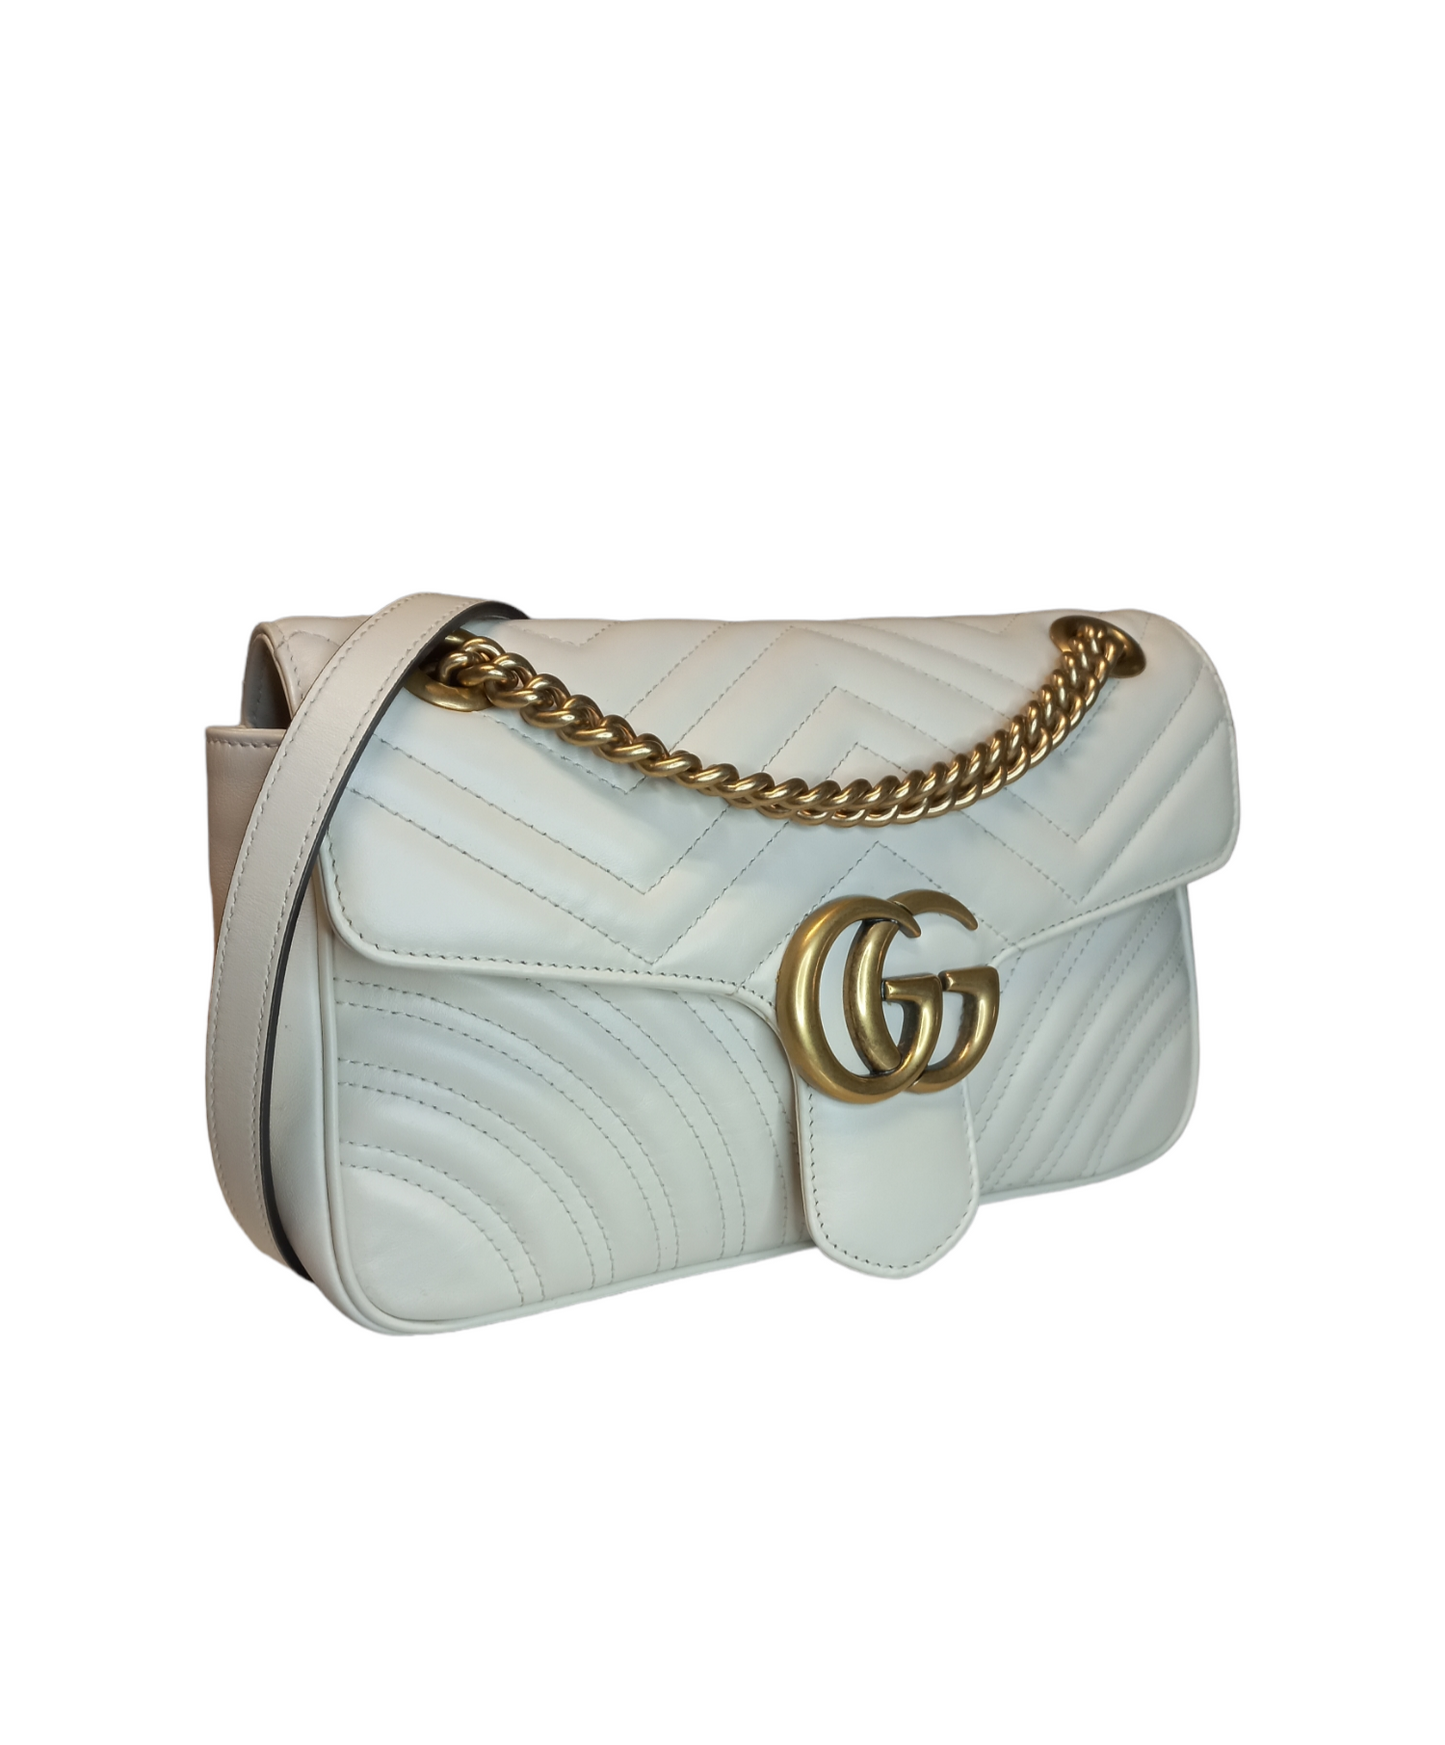 Gucci Leather Marmont Matelasse Small Shoulder Bag White